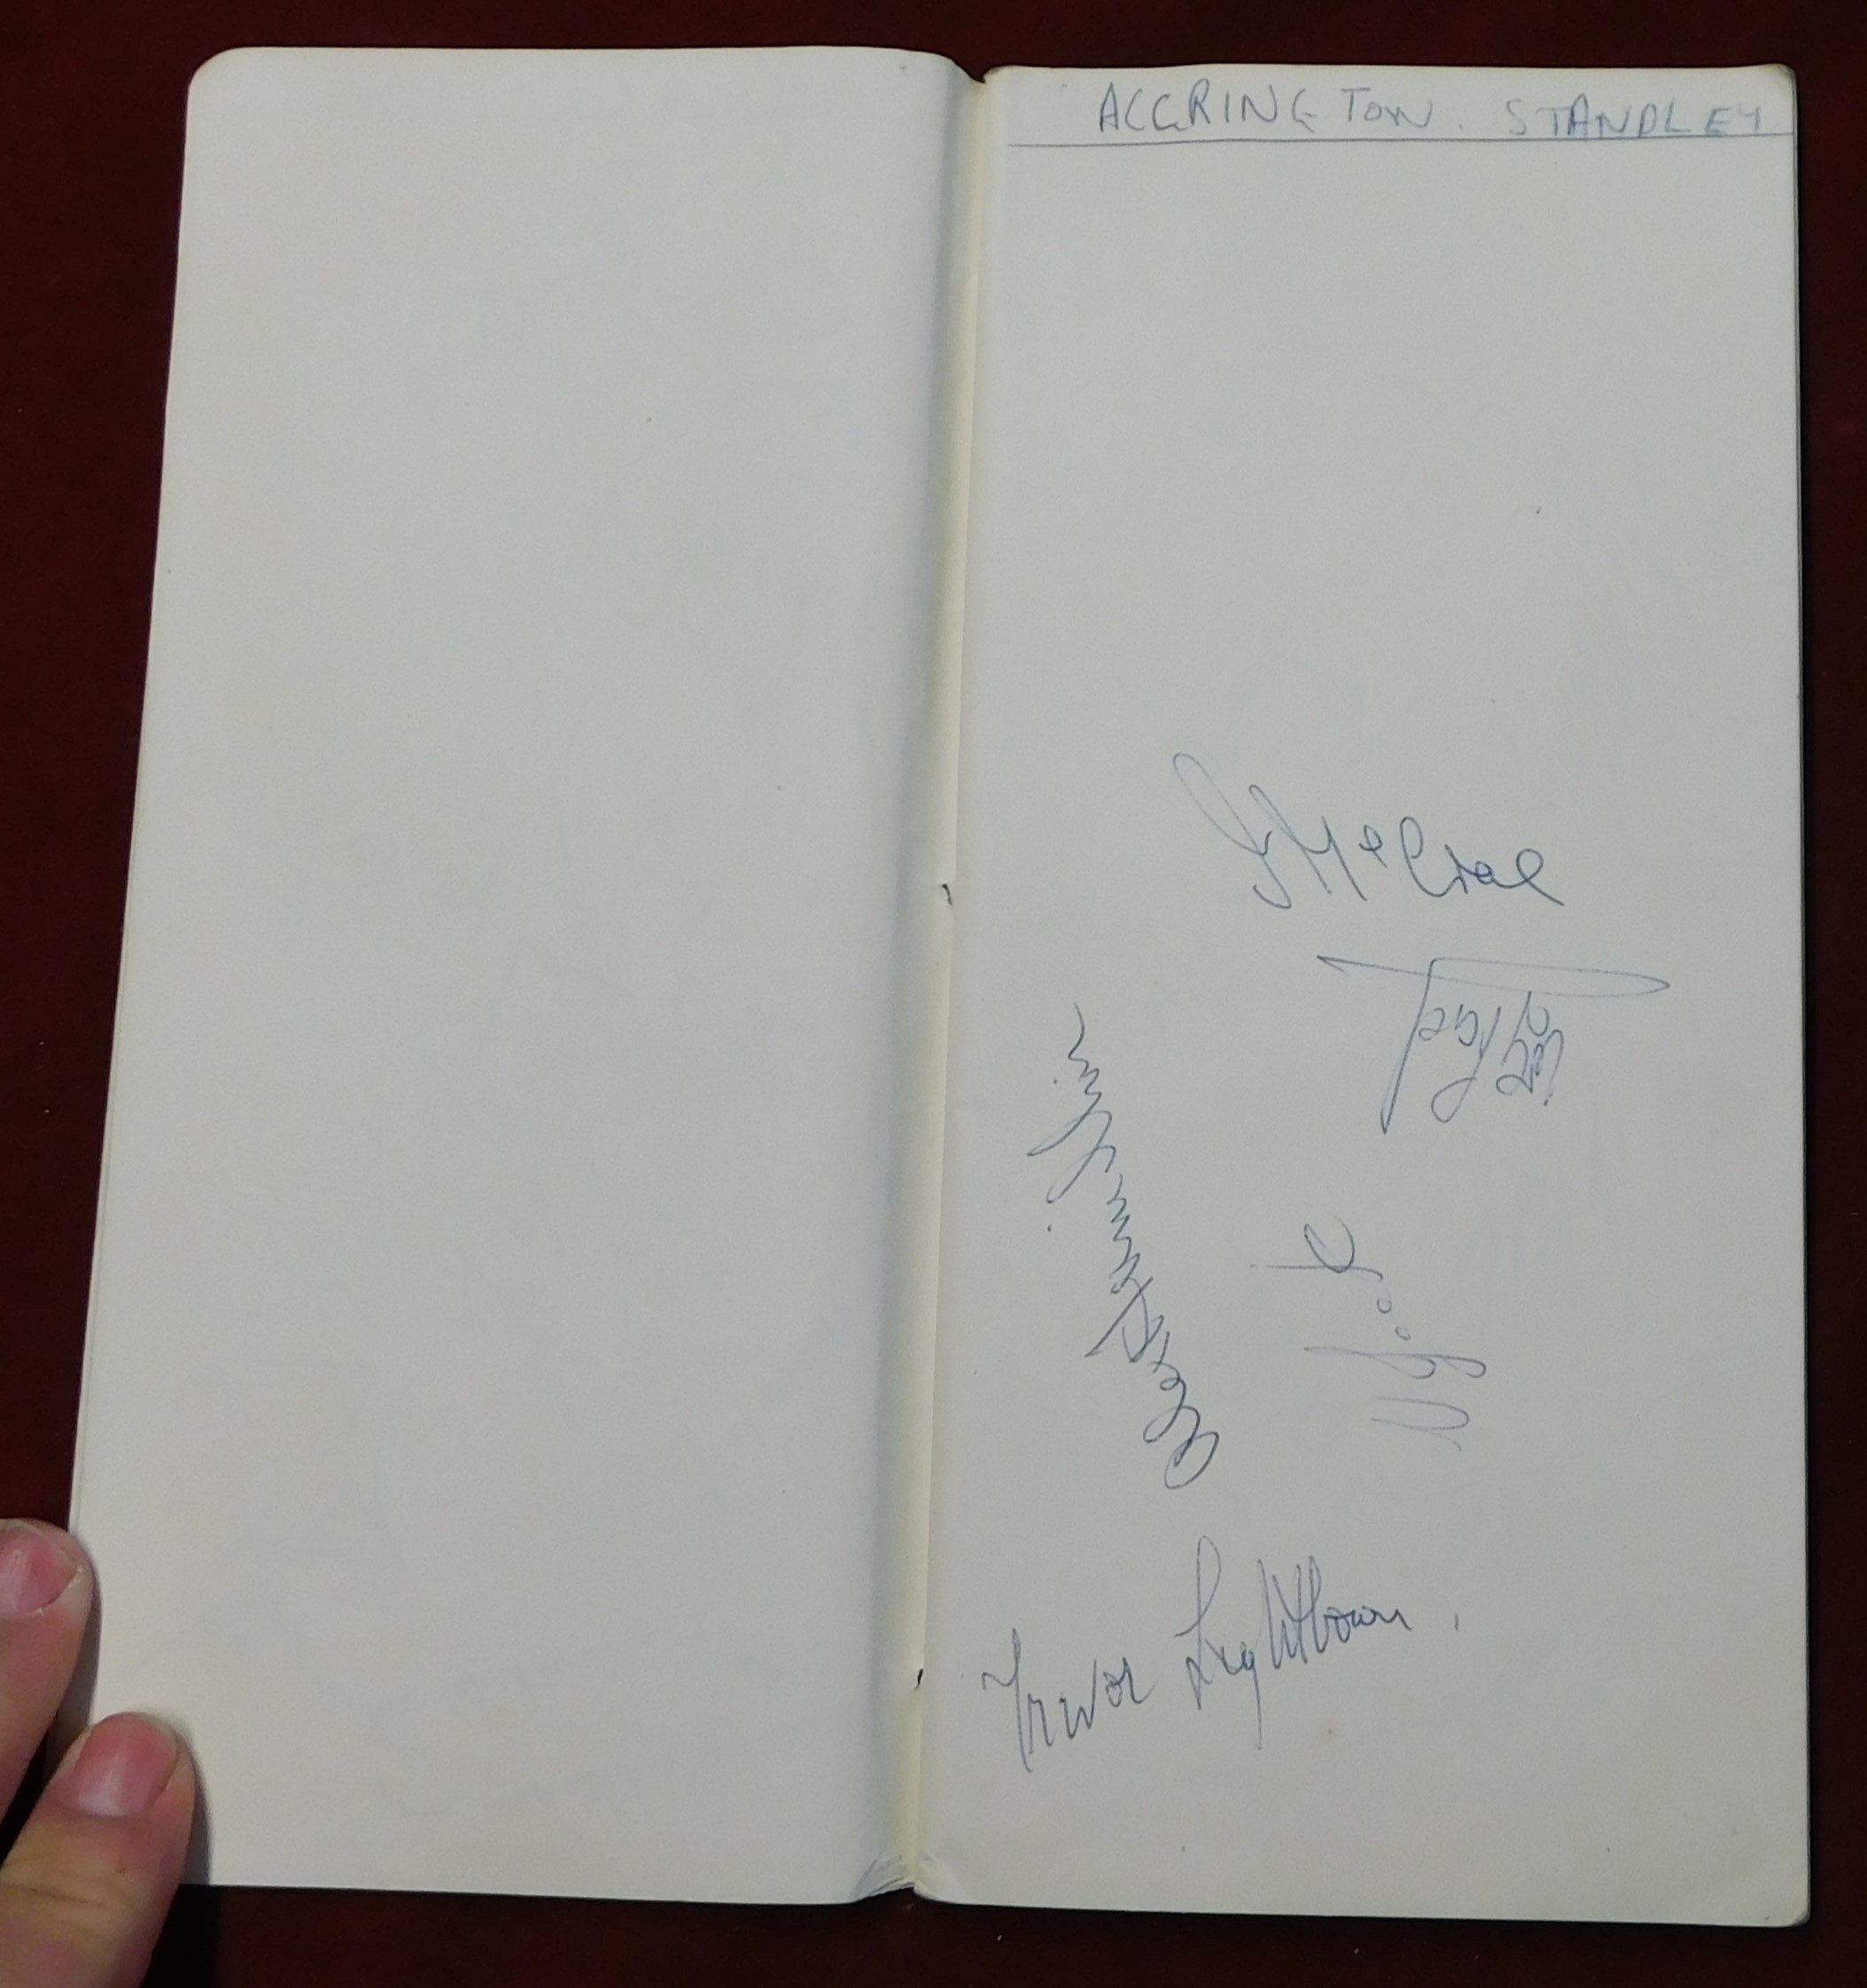 An autograph book with 120+ autographs from the 1959/60 and 1960/61 seasons featuring many clubs - Image 4 of 5